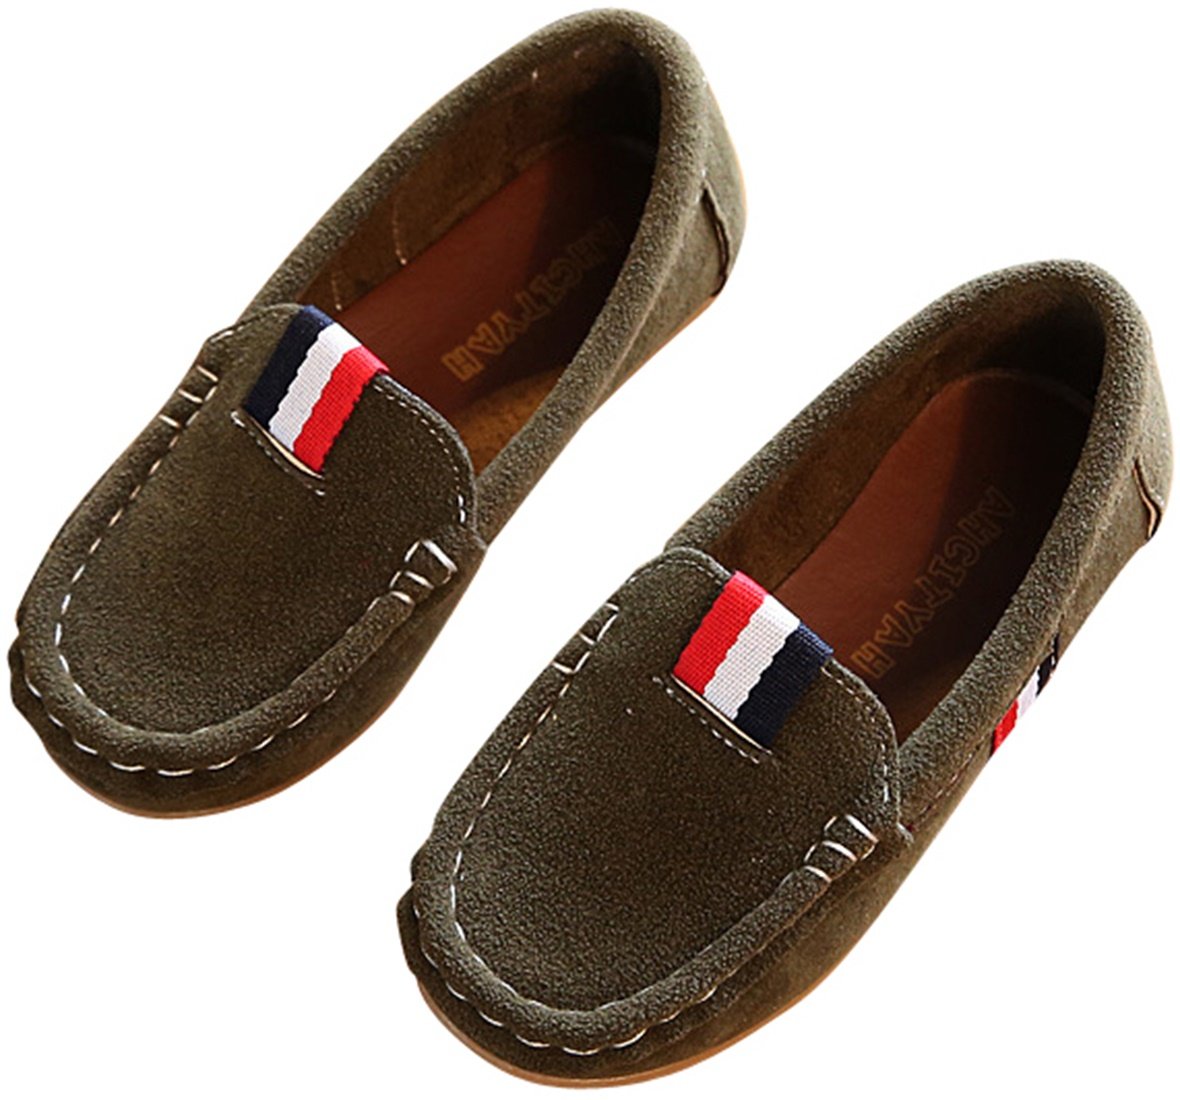 PPXID Toddler Little Girl's Boy's Slip-on Loafers Casual Moccasin Oxford Flat Shoes